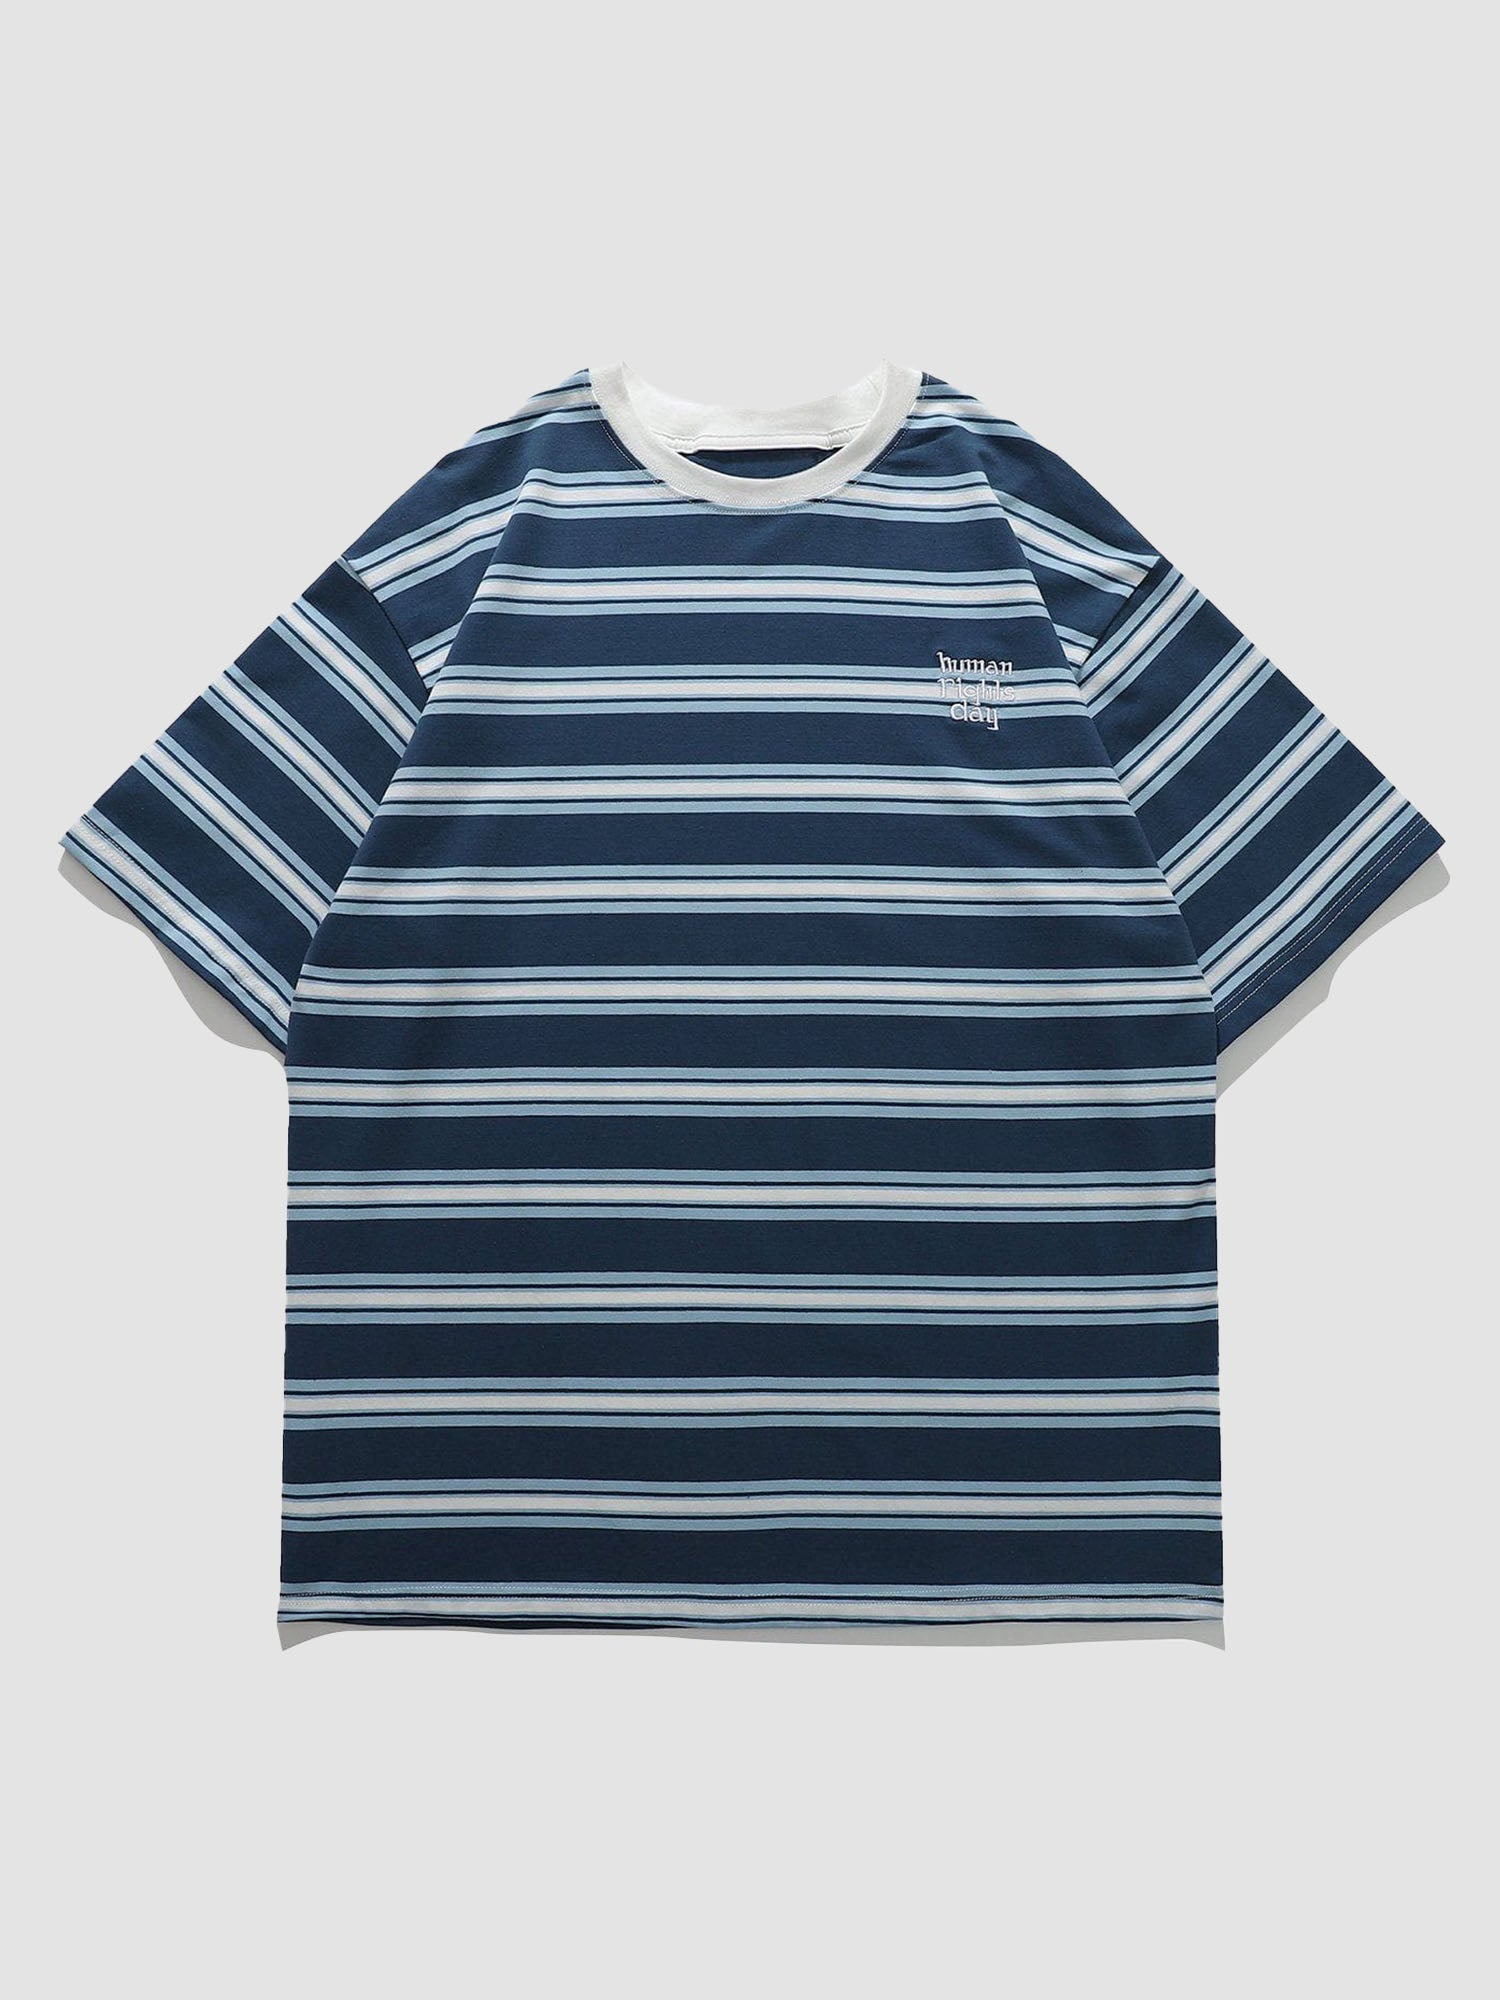 JUSTNOTAG Embroidered Striped Panel Short Sleeve Tee